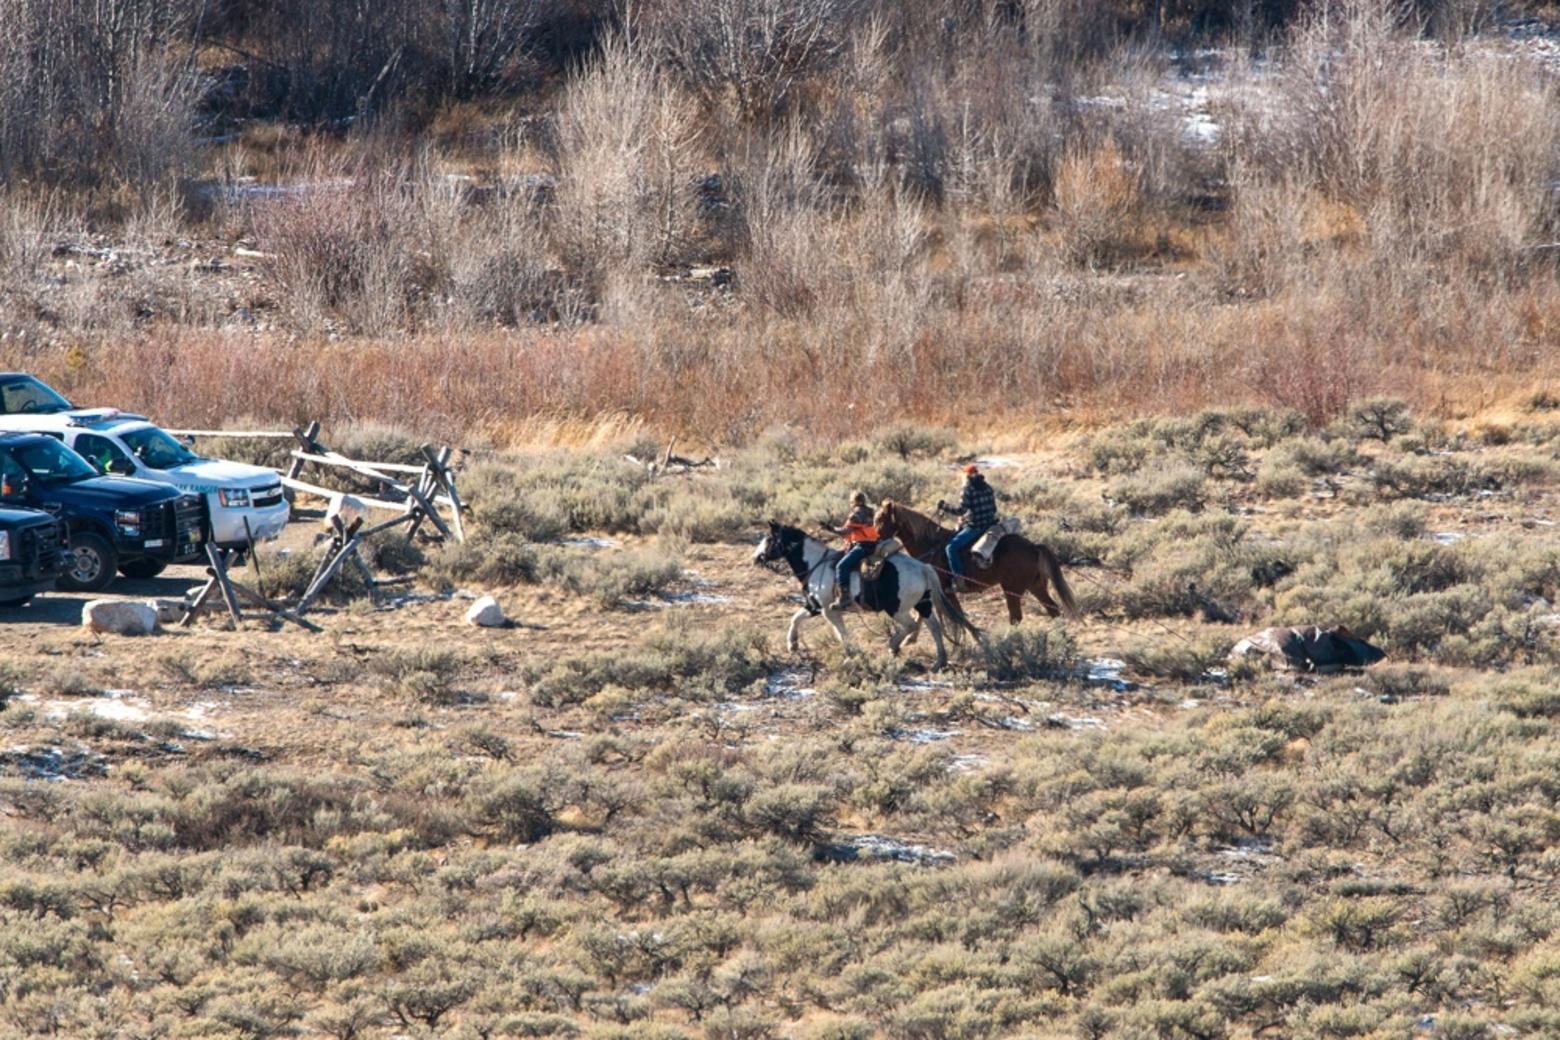 Horse people drag a dead grizzly that was killed by elk hunters claiming self defense inside Grand Teton National Park.  It's annual "elk reduction program" is the only big game hunt that occurs inside a national park and is very controversial.  That grizzlies might be shot and killed by elk hunters inside Grand Teton at all has prompted some conservationists to sue to stop the hunt. Grand Teton officials today require all hunters to carry bear spray. Photo by Thomas D. Mangelsen (mangelsen.com)